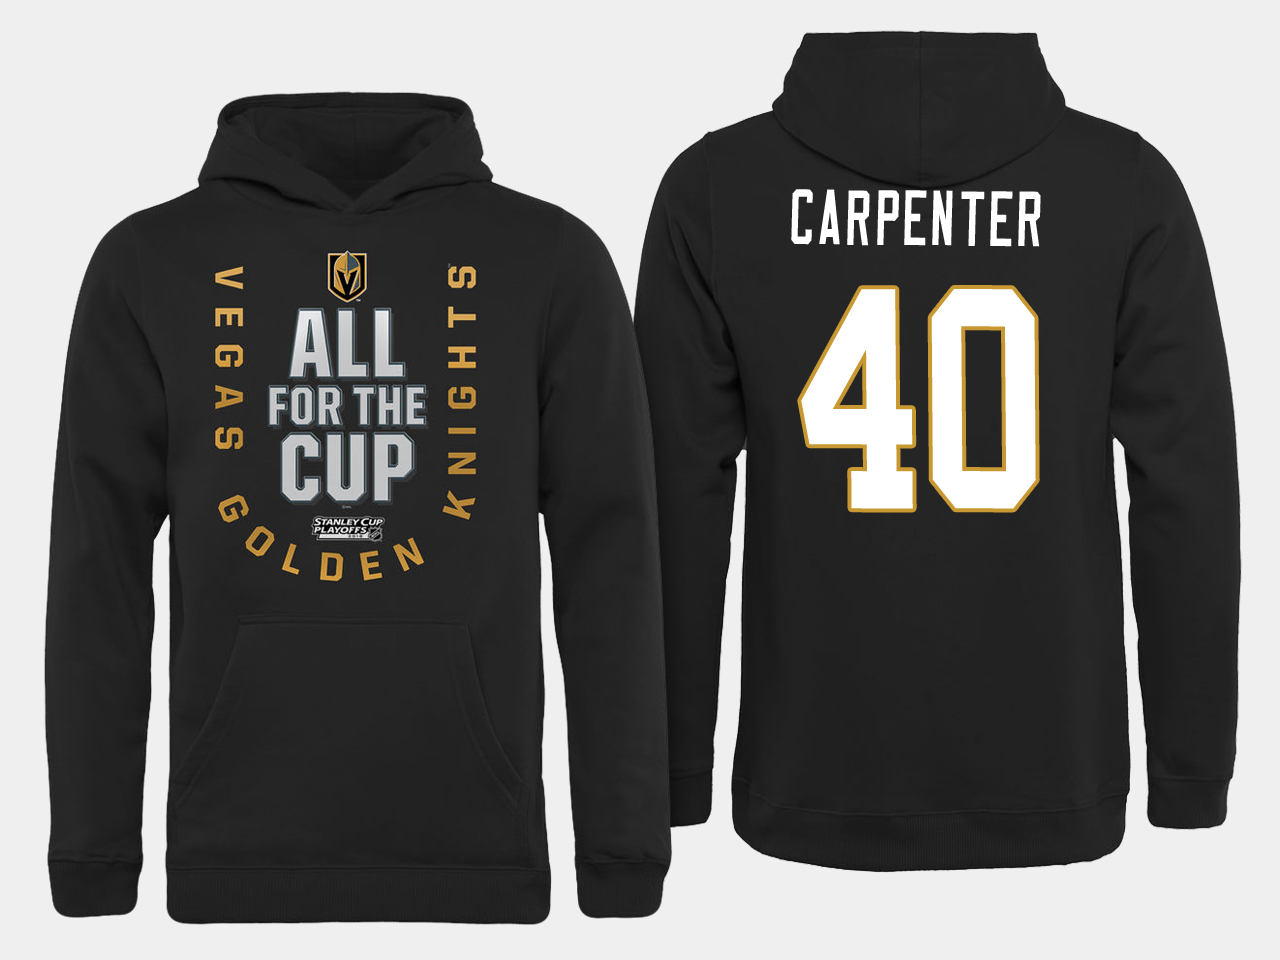 Men NHL Vegas Golden Knights #40 Carpenter All for the Cup hoodie->more nhl jerseys->NHL Jersey